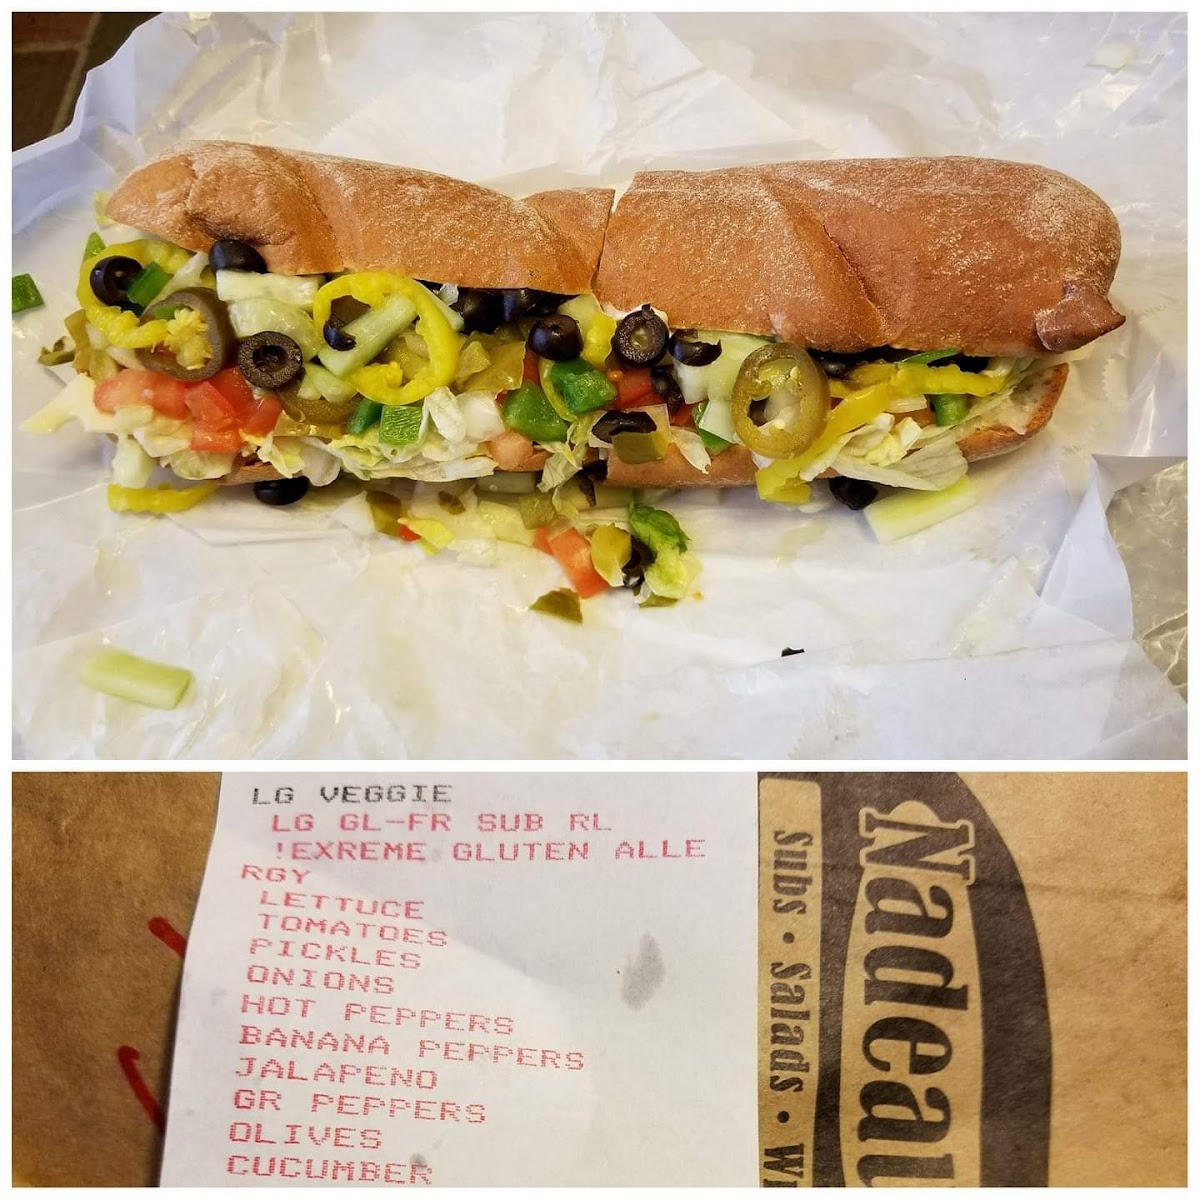 Large gluten free cold veggie sub on Udi's gluten free roll about $9.00, big delicious sandwich.